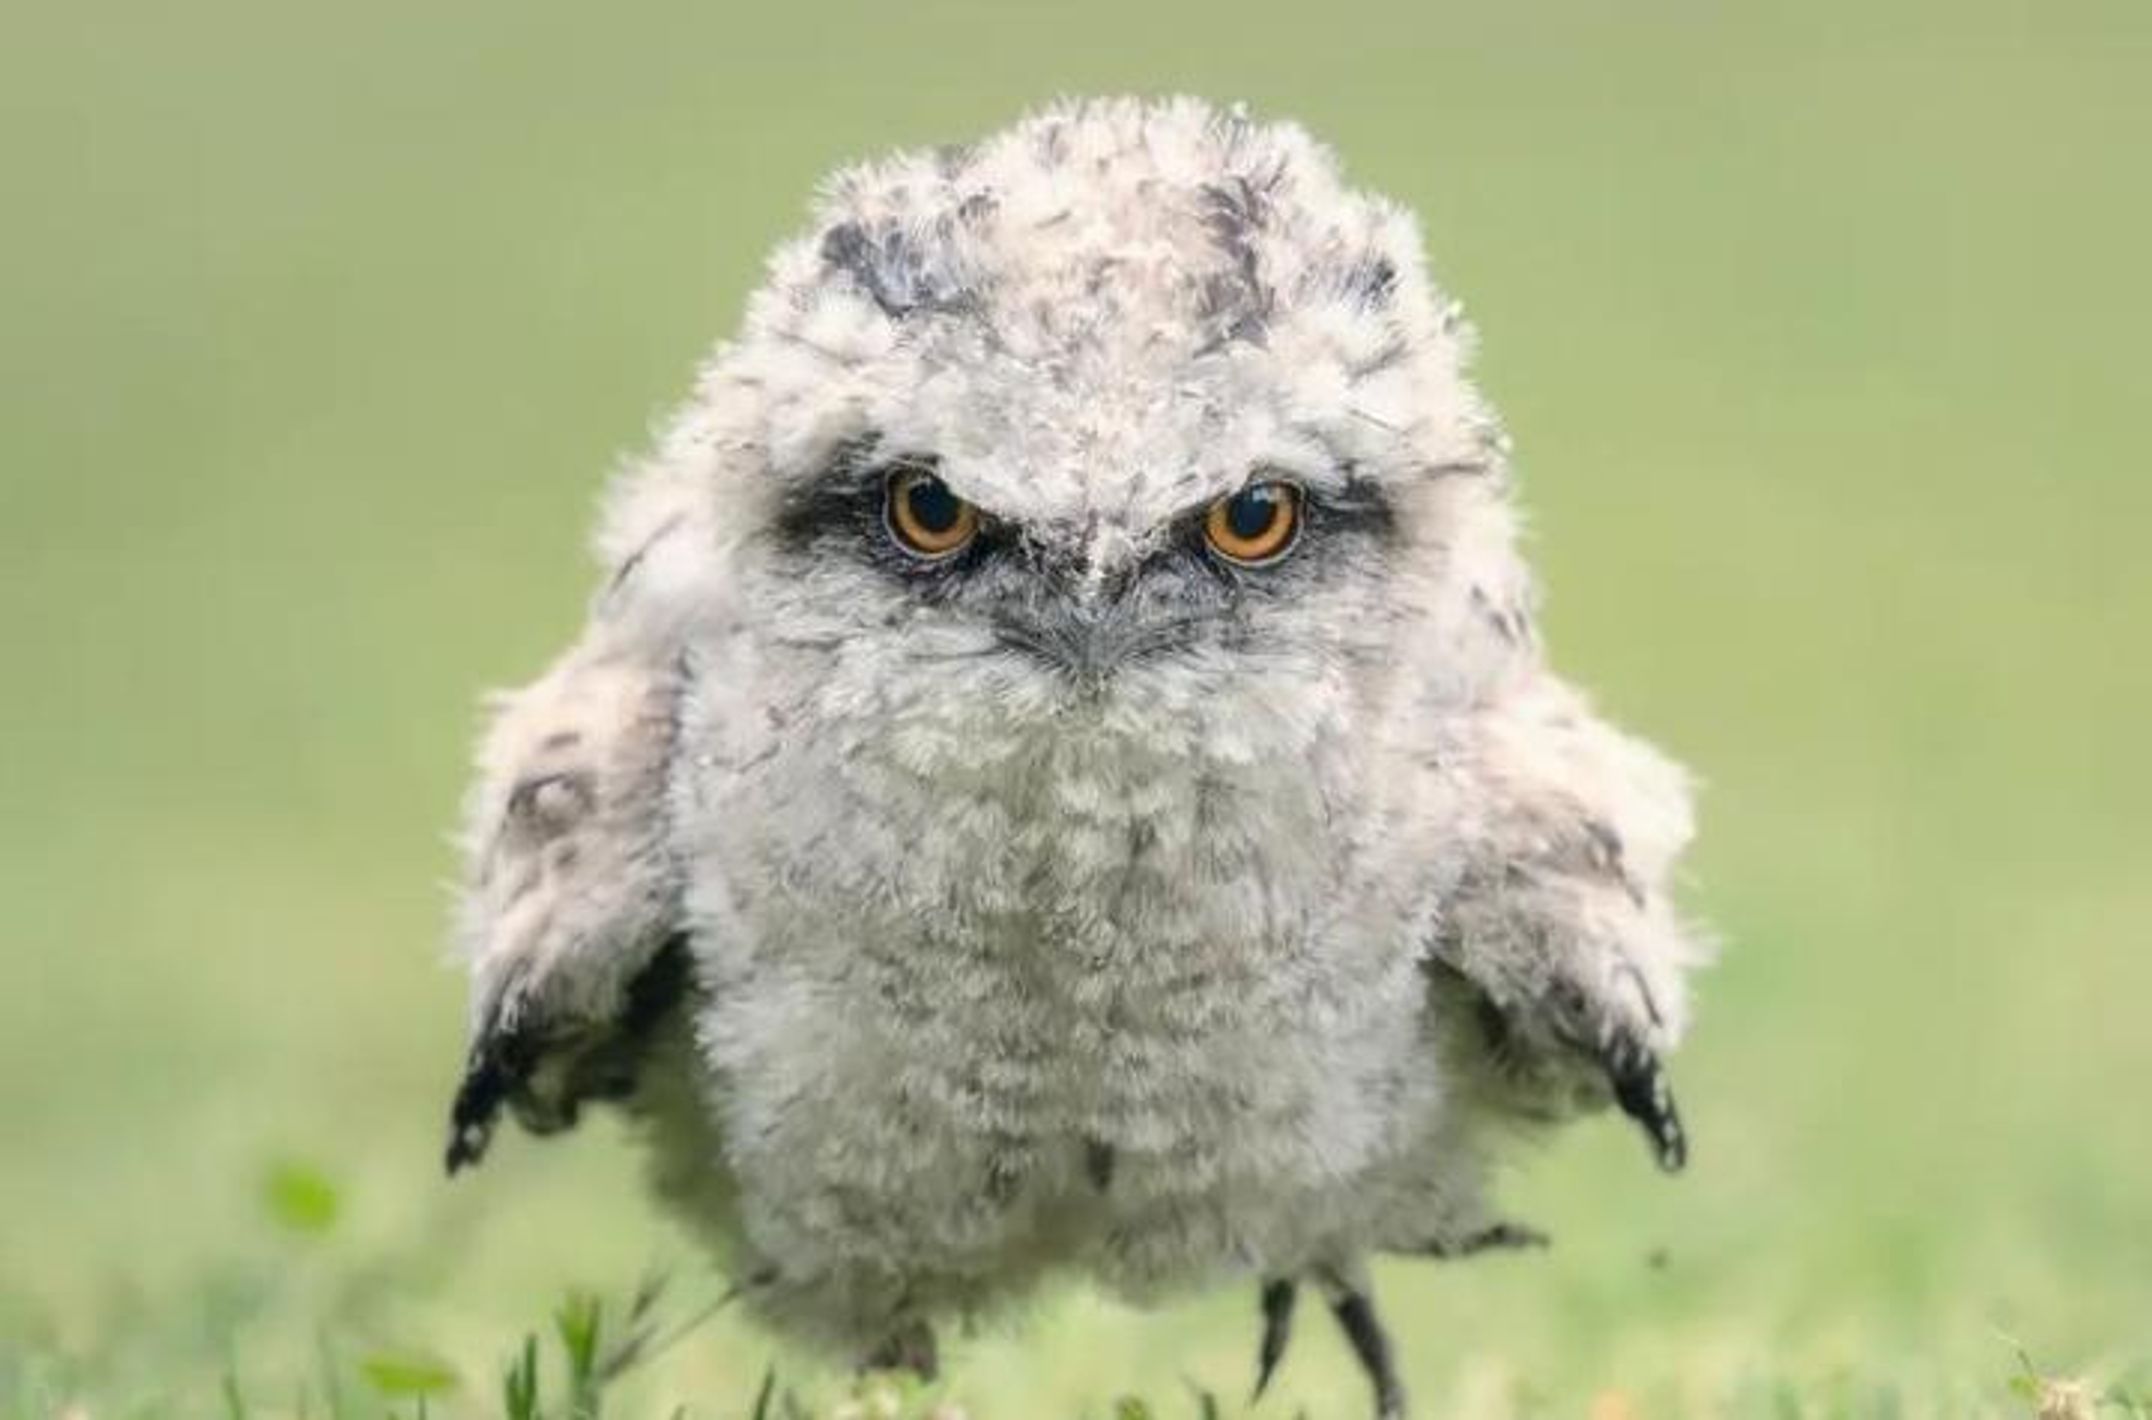 Tawny frogmouth chick on the ground